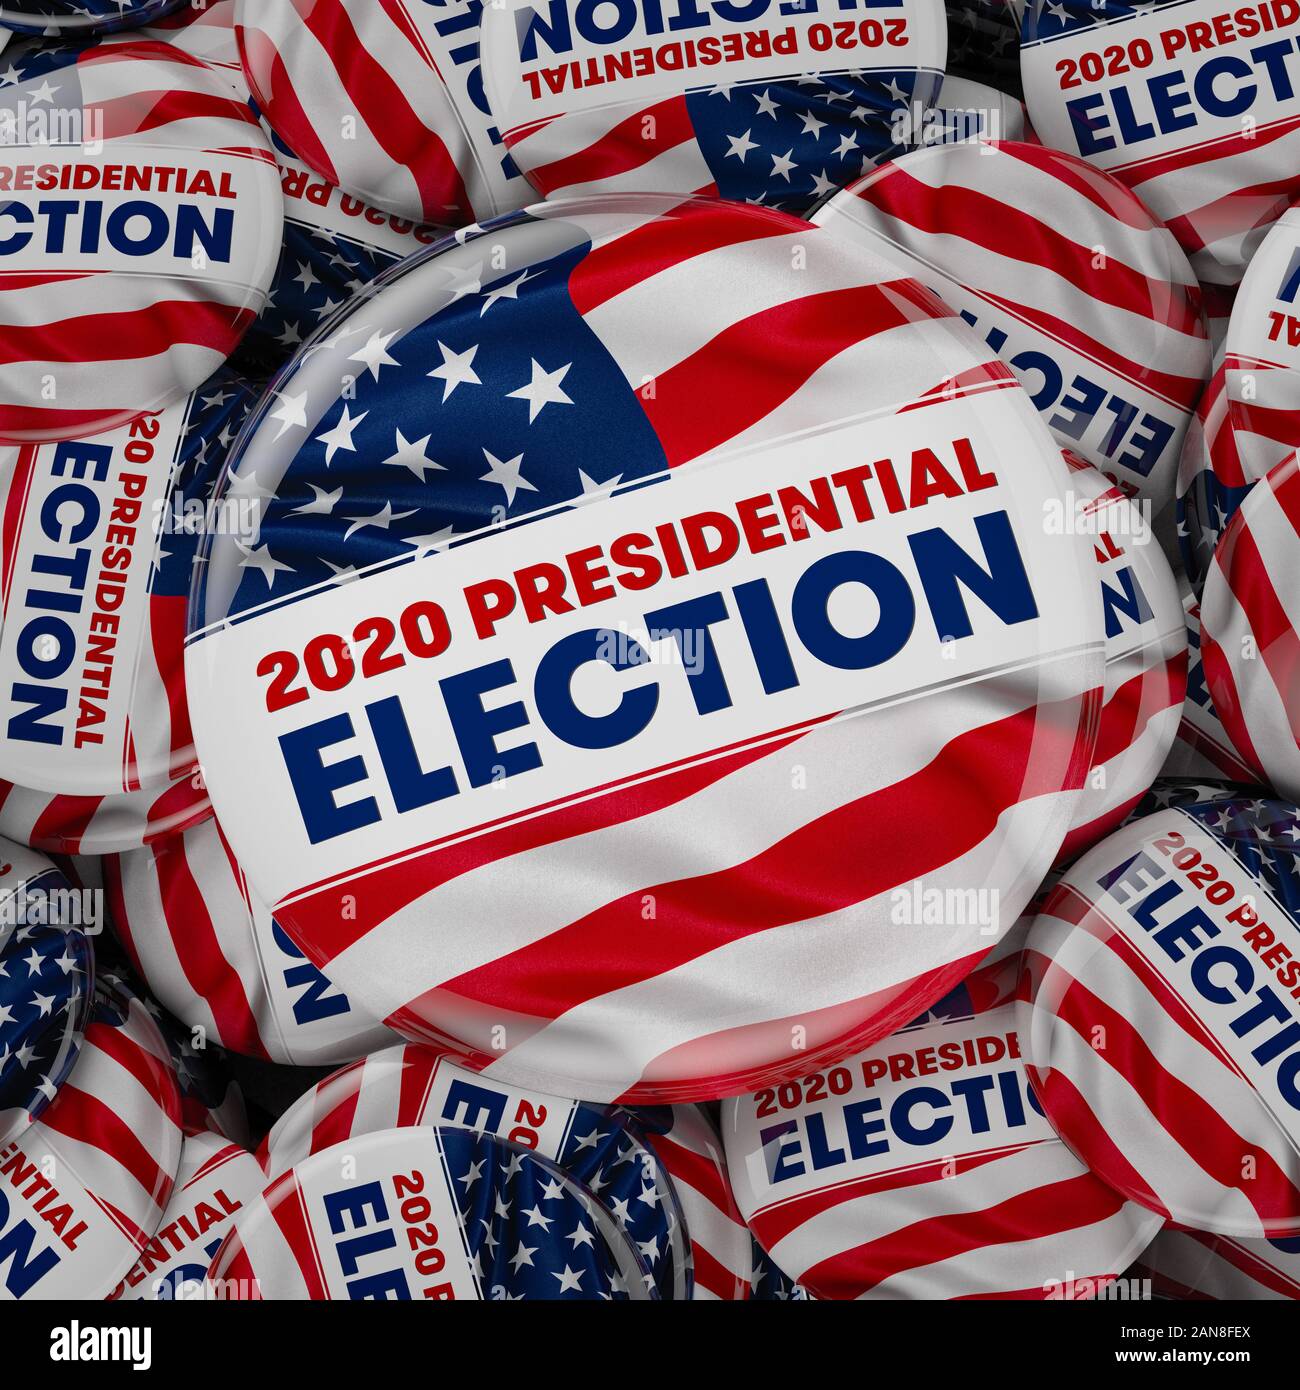 3D illustration of US Presidential Election buttons. Stock Photo